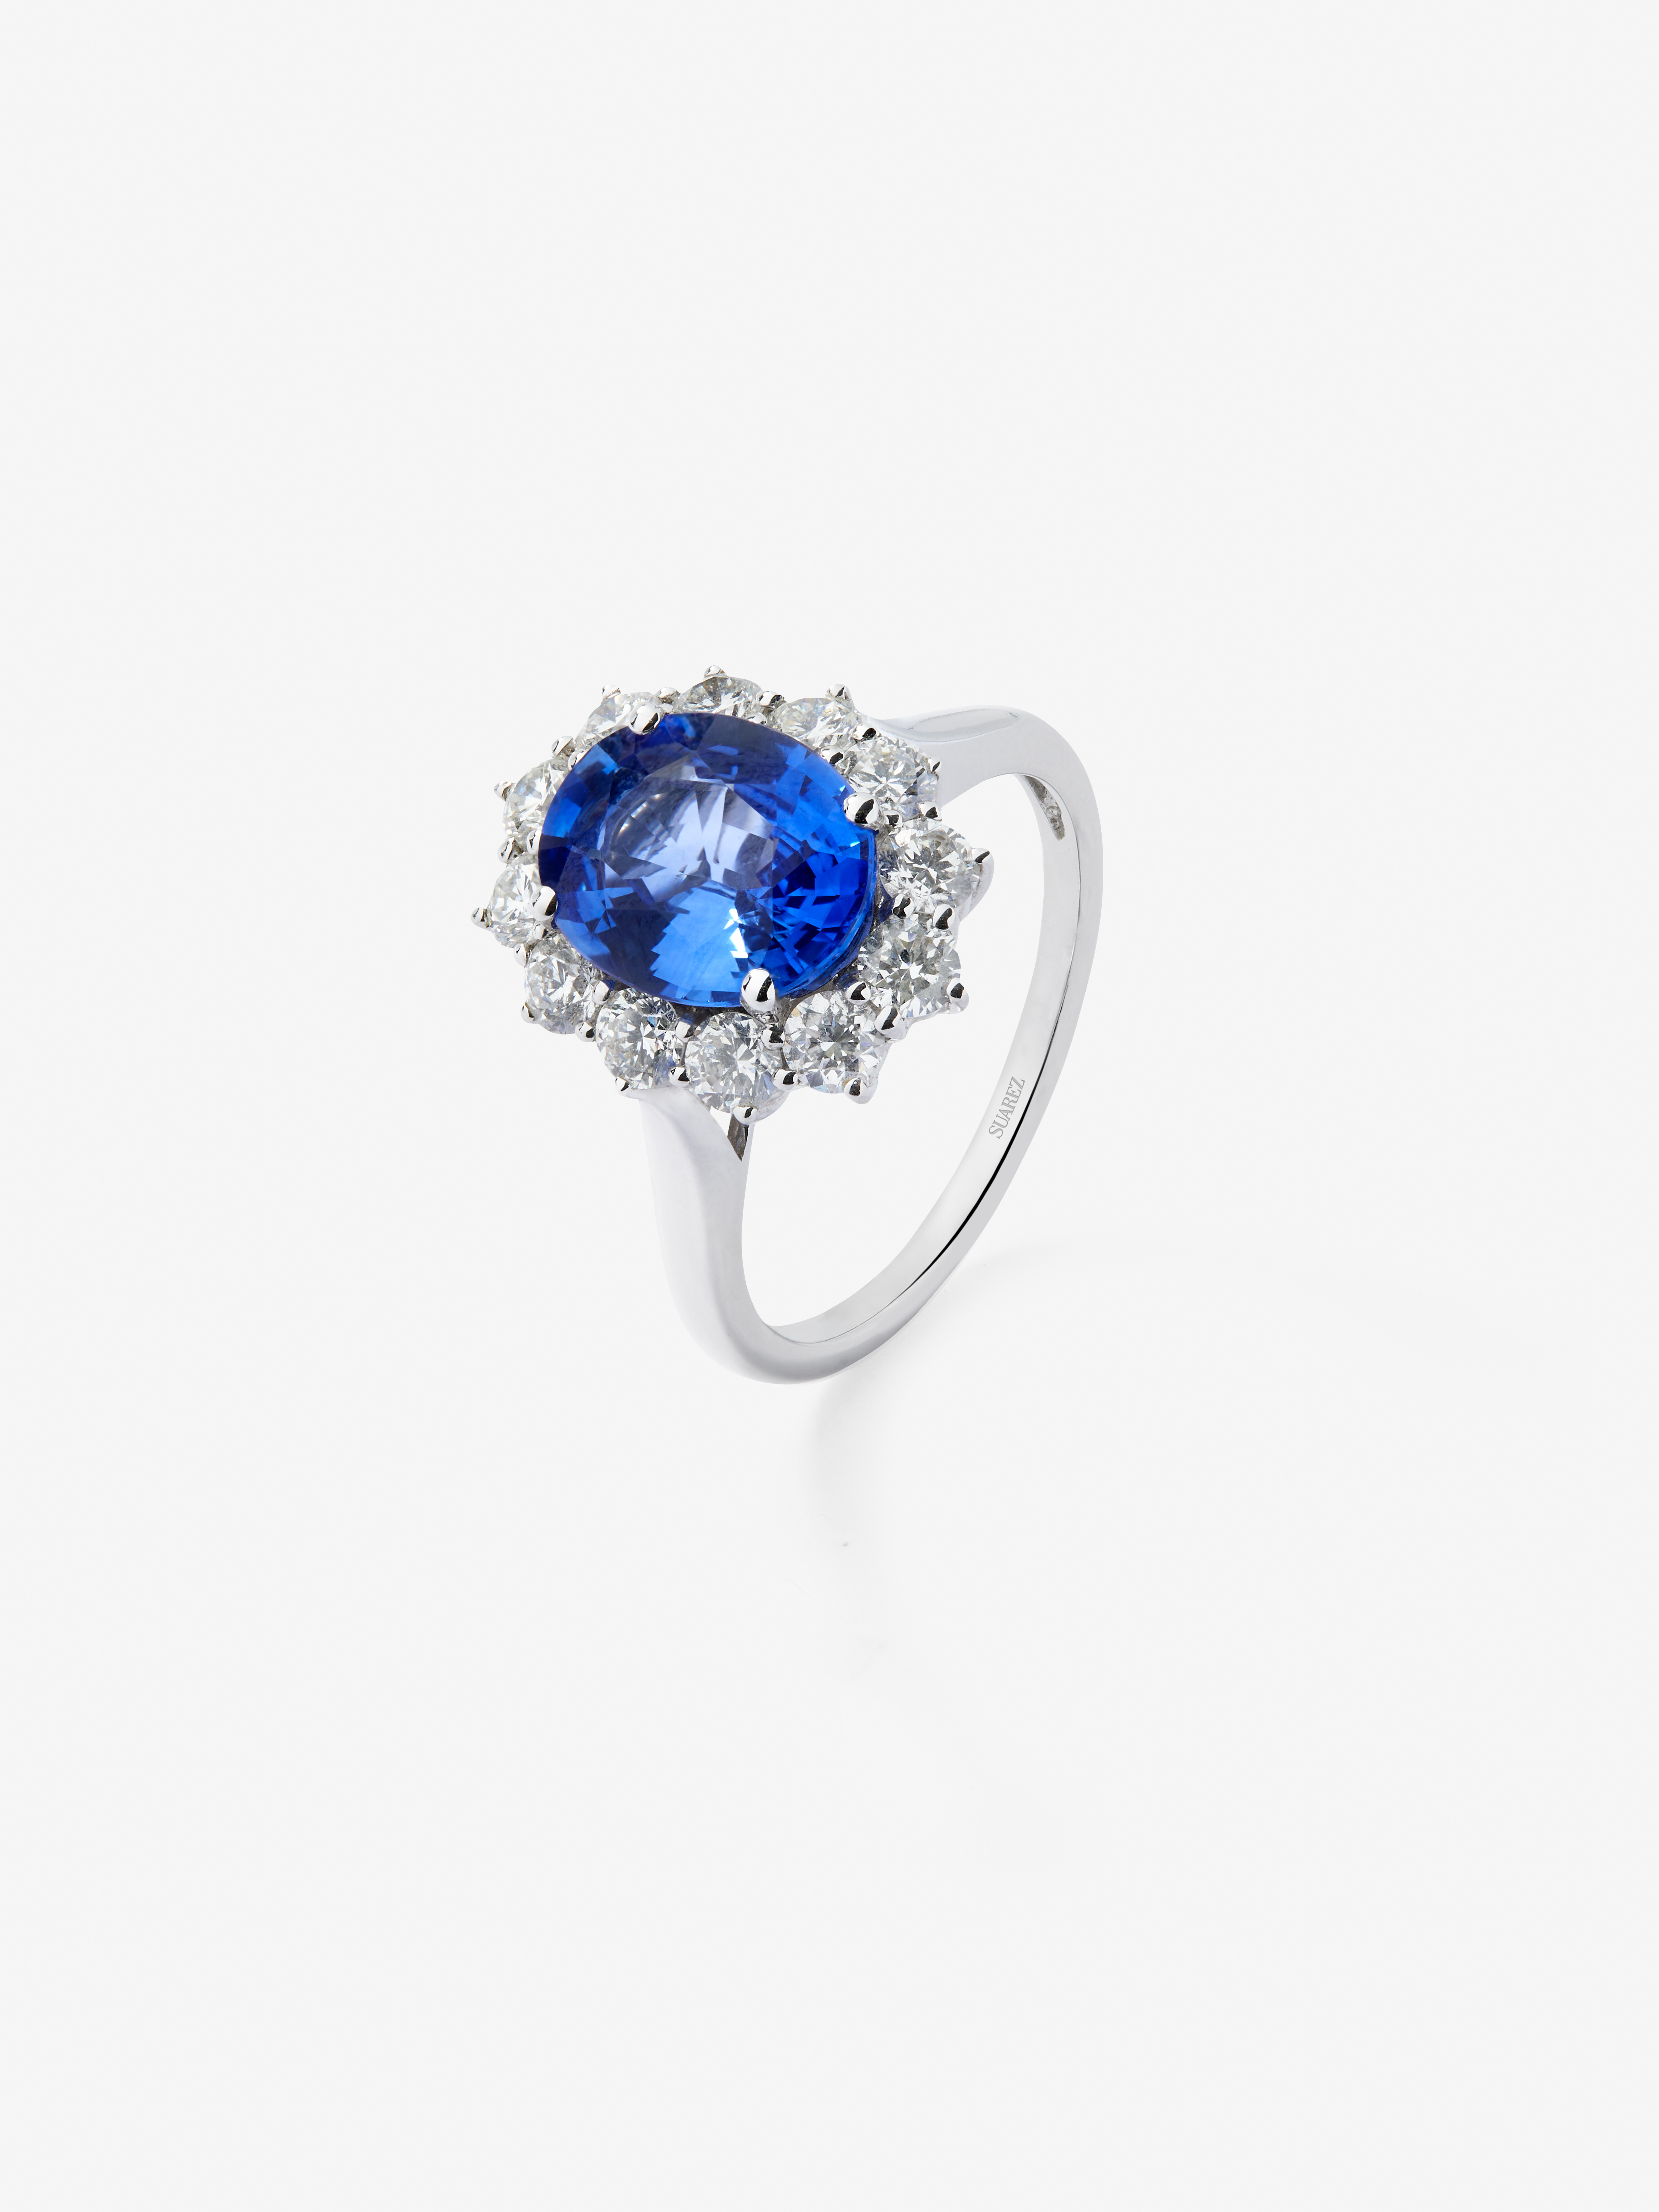 18K White Gold Ring with Royal Blue Zafiro in 2.33 cts oval size